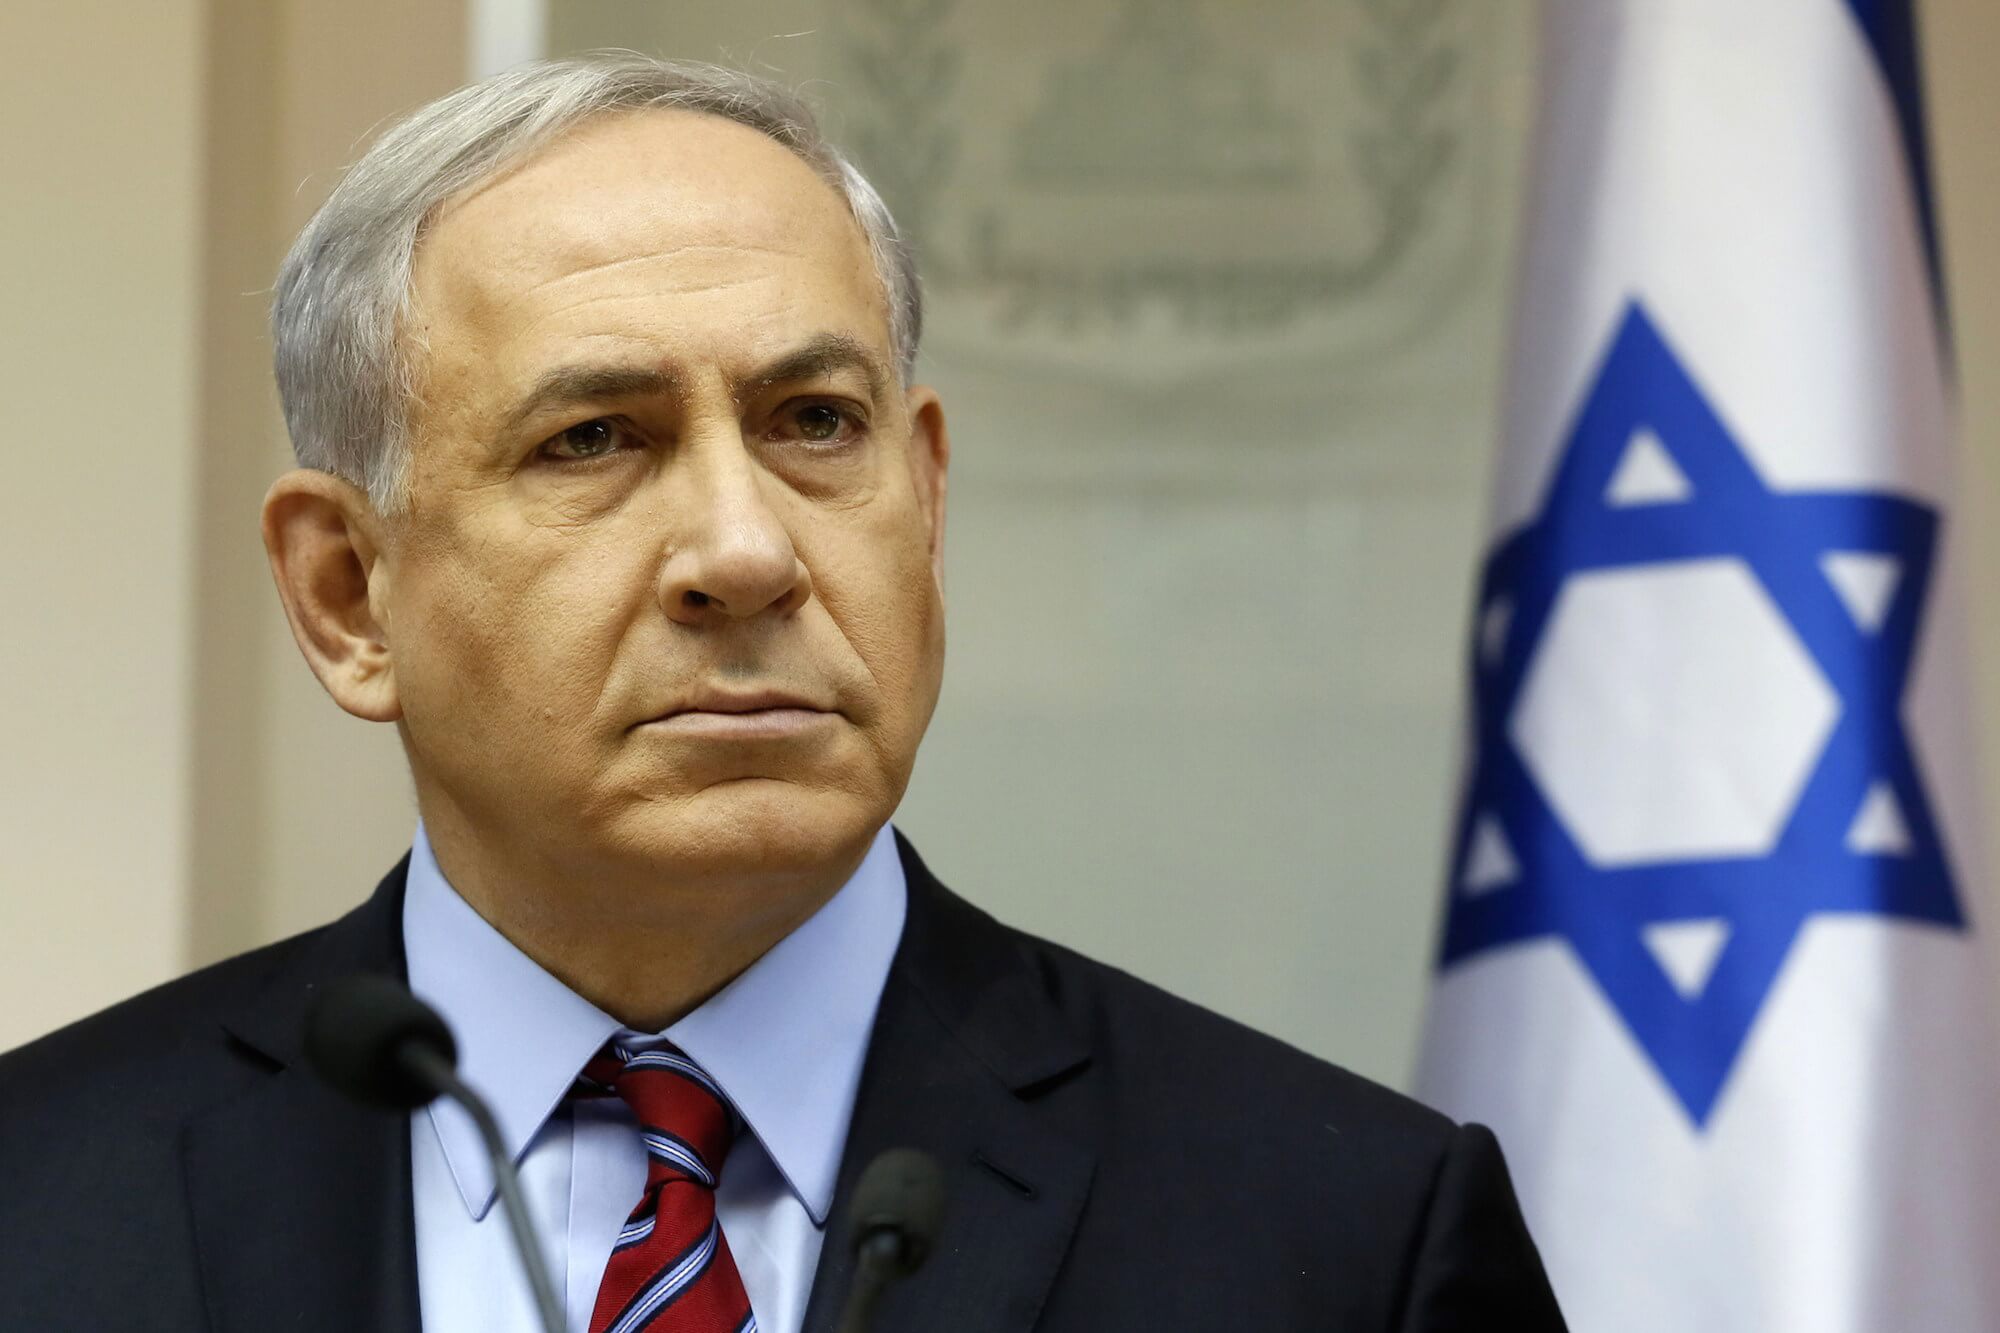 Netanyahu and Europe’s far right find common ground after the Paris ...